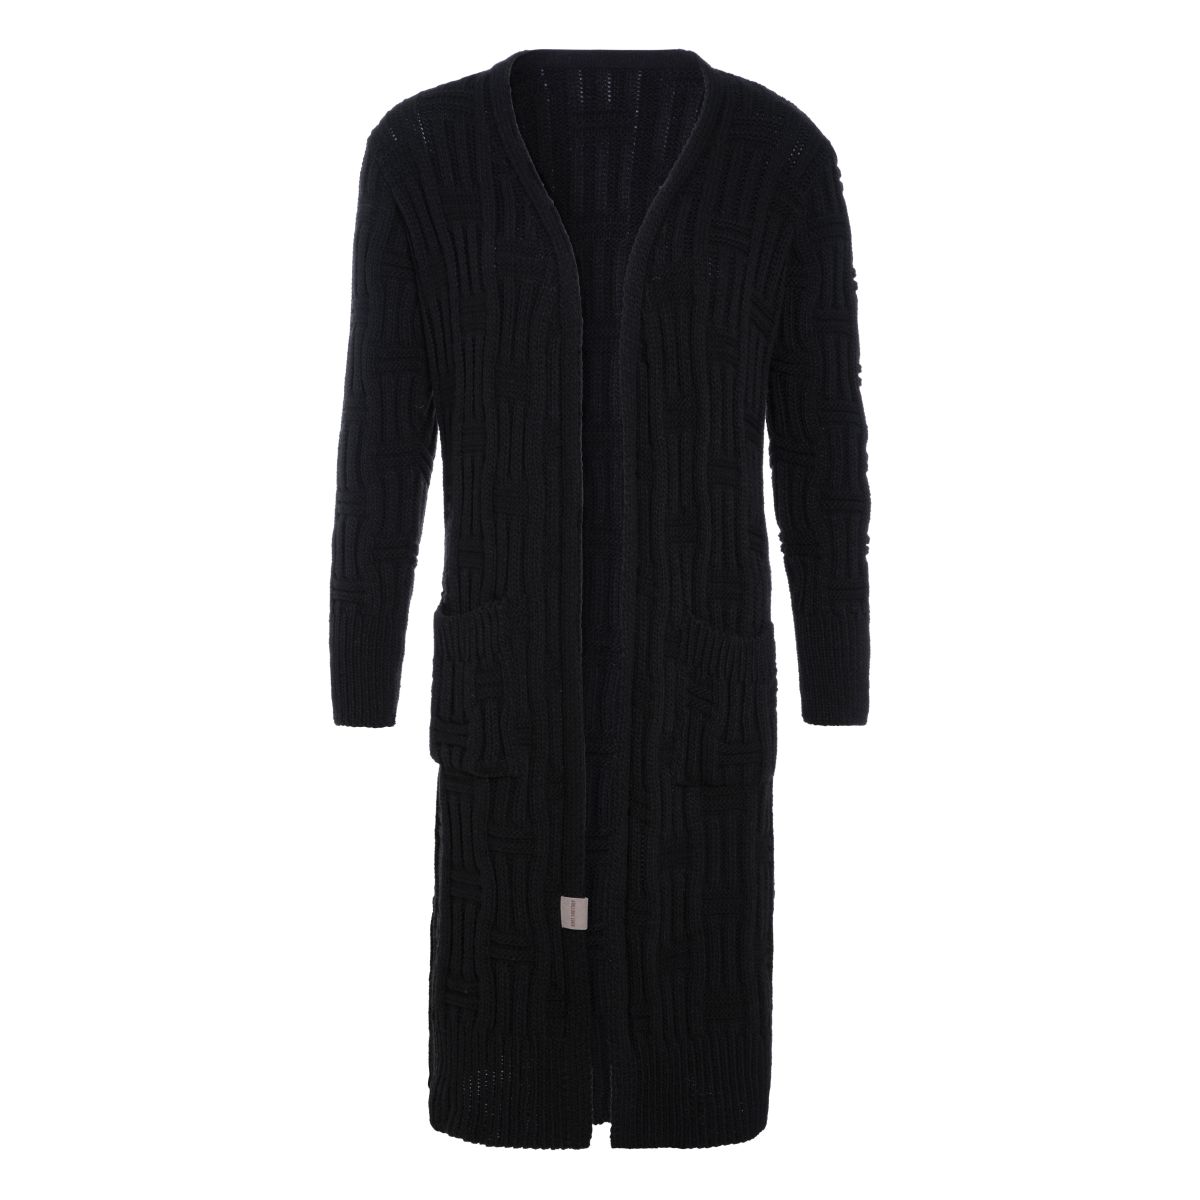 bobby long knitted cardigan black 3638 with side pockets